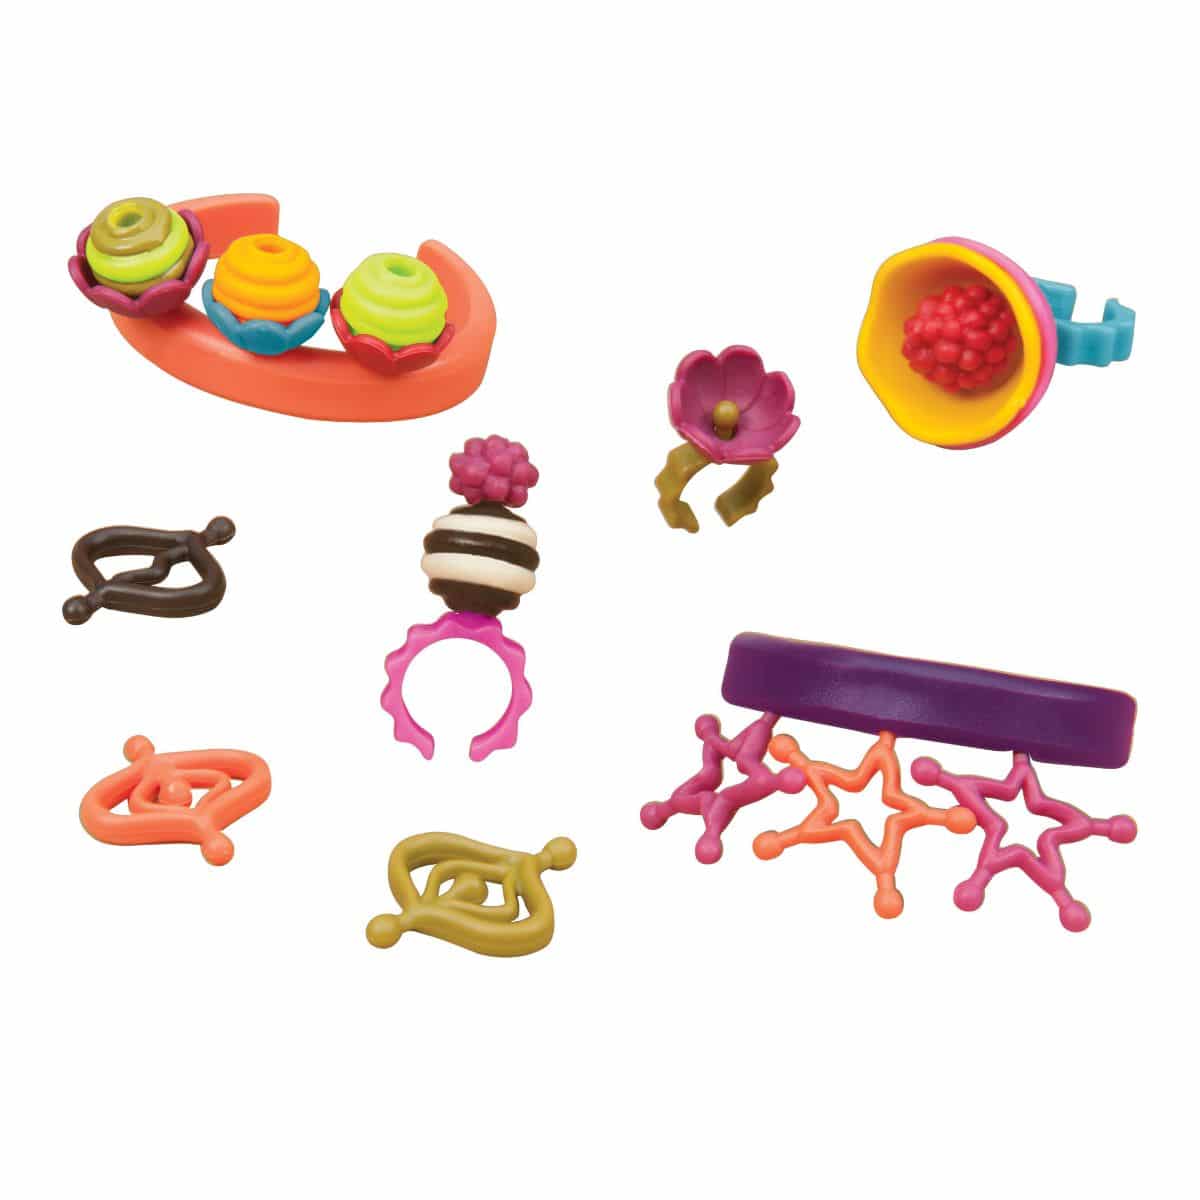 B.eauty Pops | Jewelry Kit for Kids | 150 Pieces | B. toys